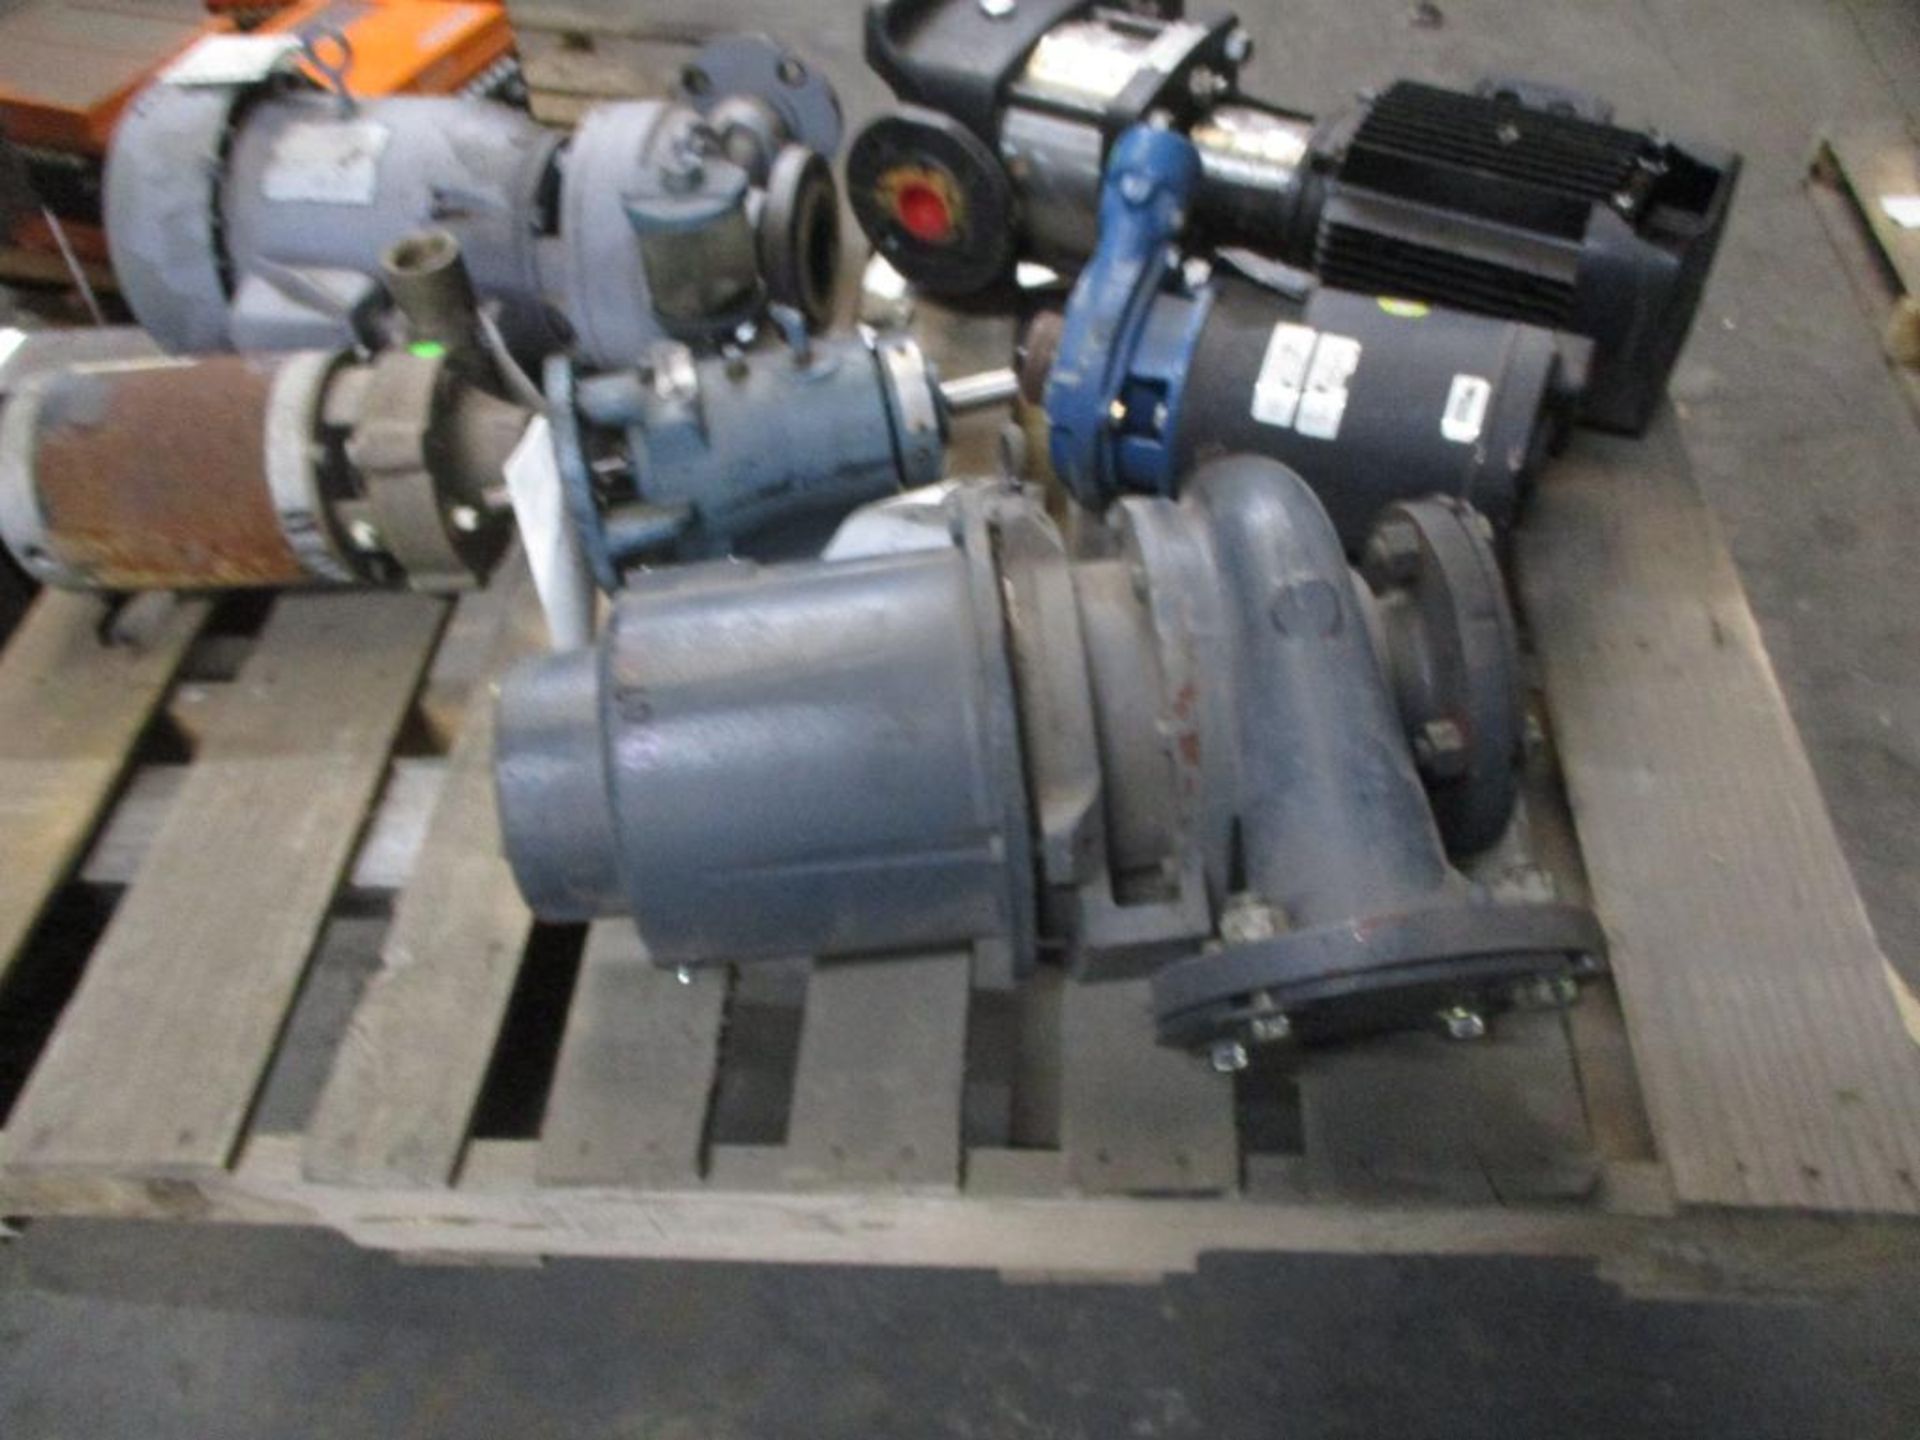 (6) Pumps; Allis Chalmers 3x3, Grundfos CR-8, Burks 1-1/2x2, & More (New & Used) - Image 4 of 4